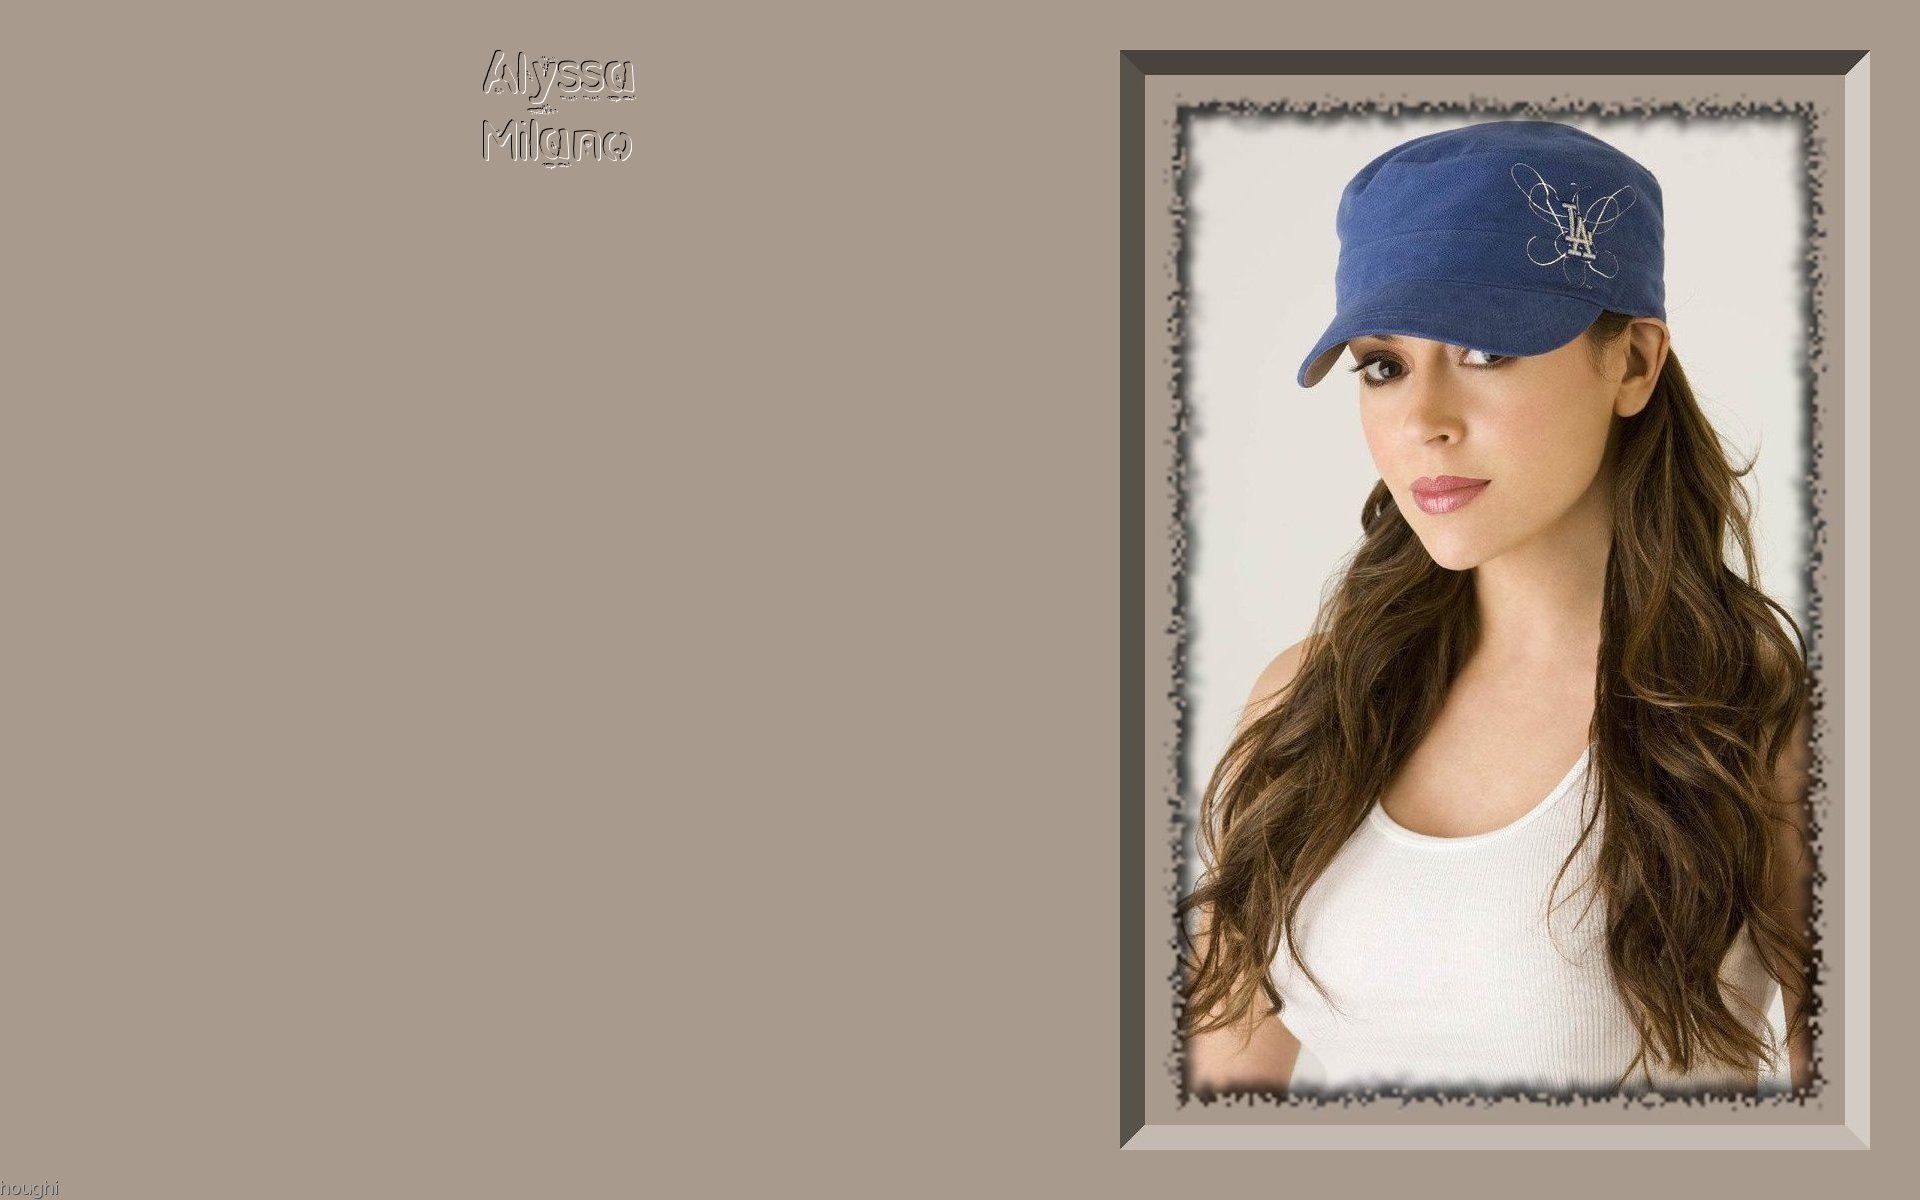 Alyssa Milano #044 - 1920x1200 Wallpapers Pictures Photos Images